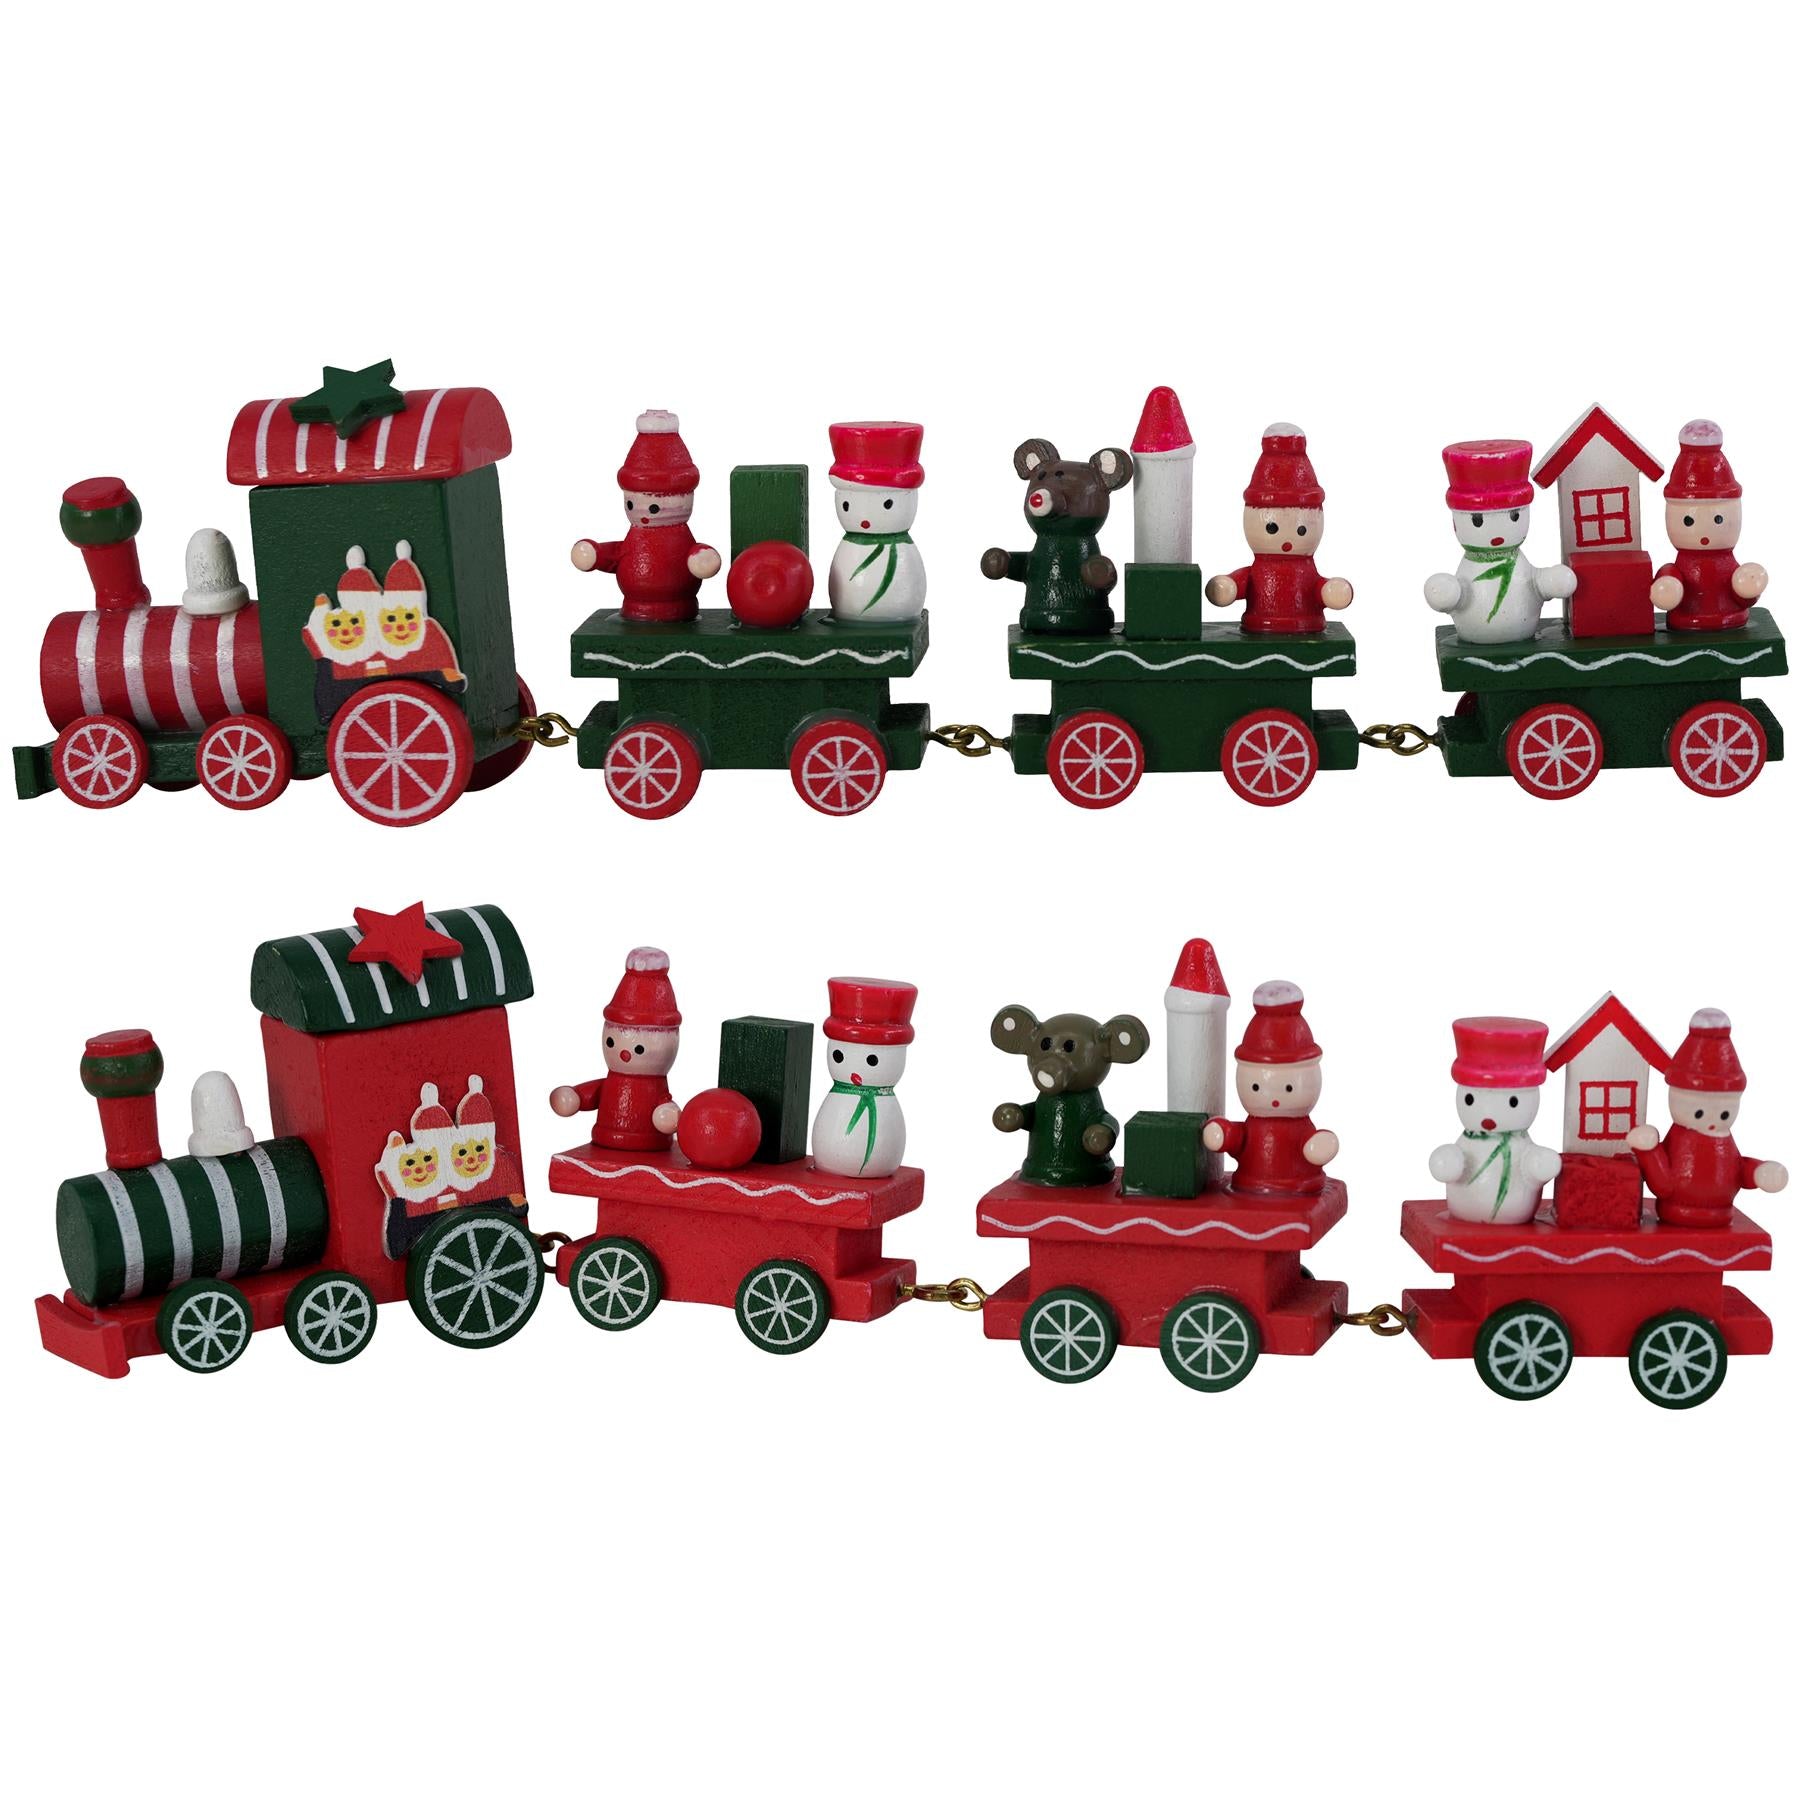 Christmas Train by The Magic Toy Shop - UKBuyZone